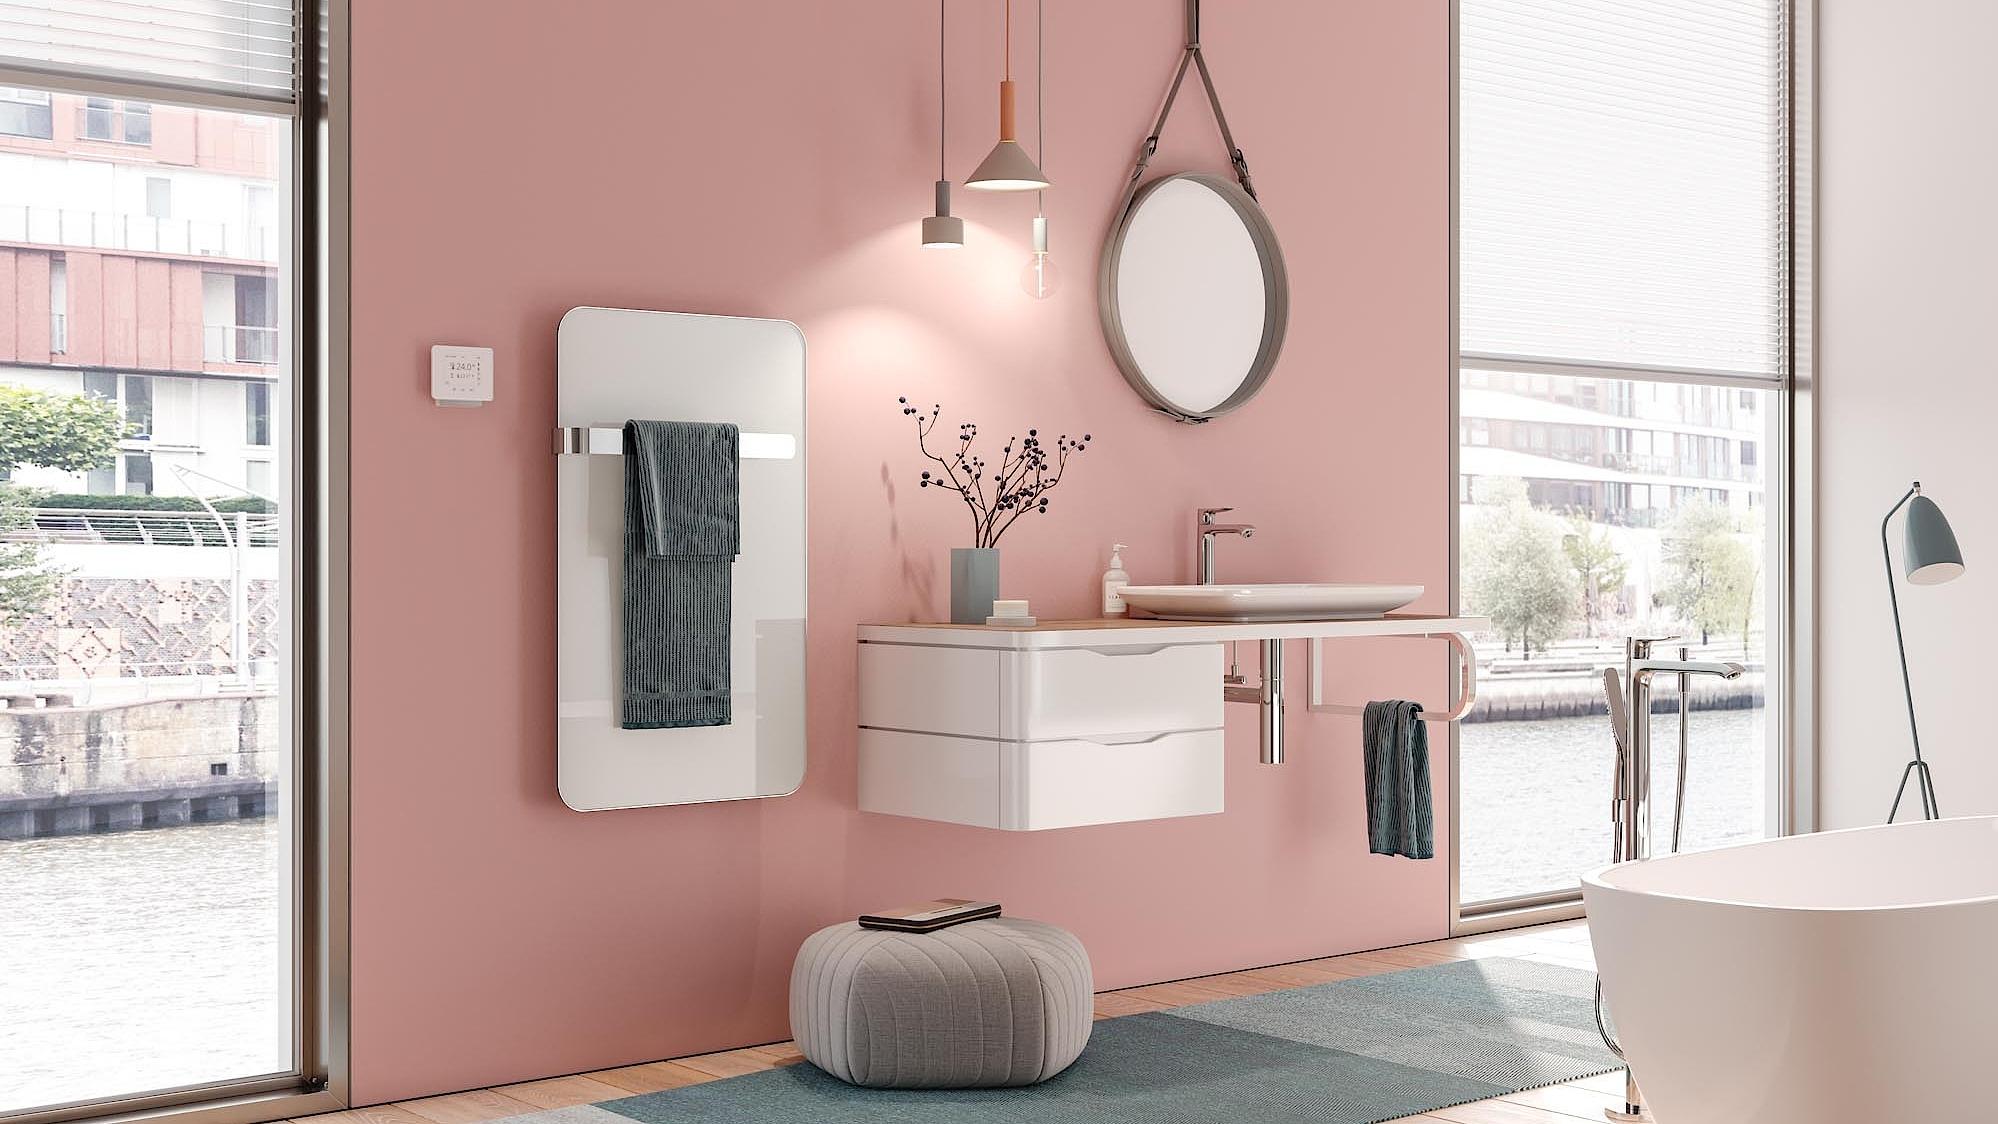 Kermi Elveo designer and bathroom radiators – ideal for buildings without a central heating system.